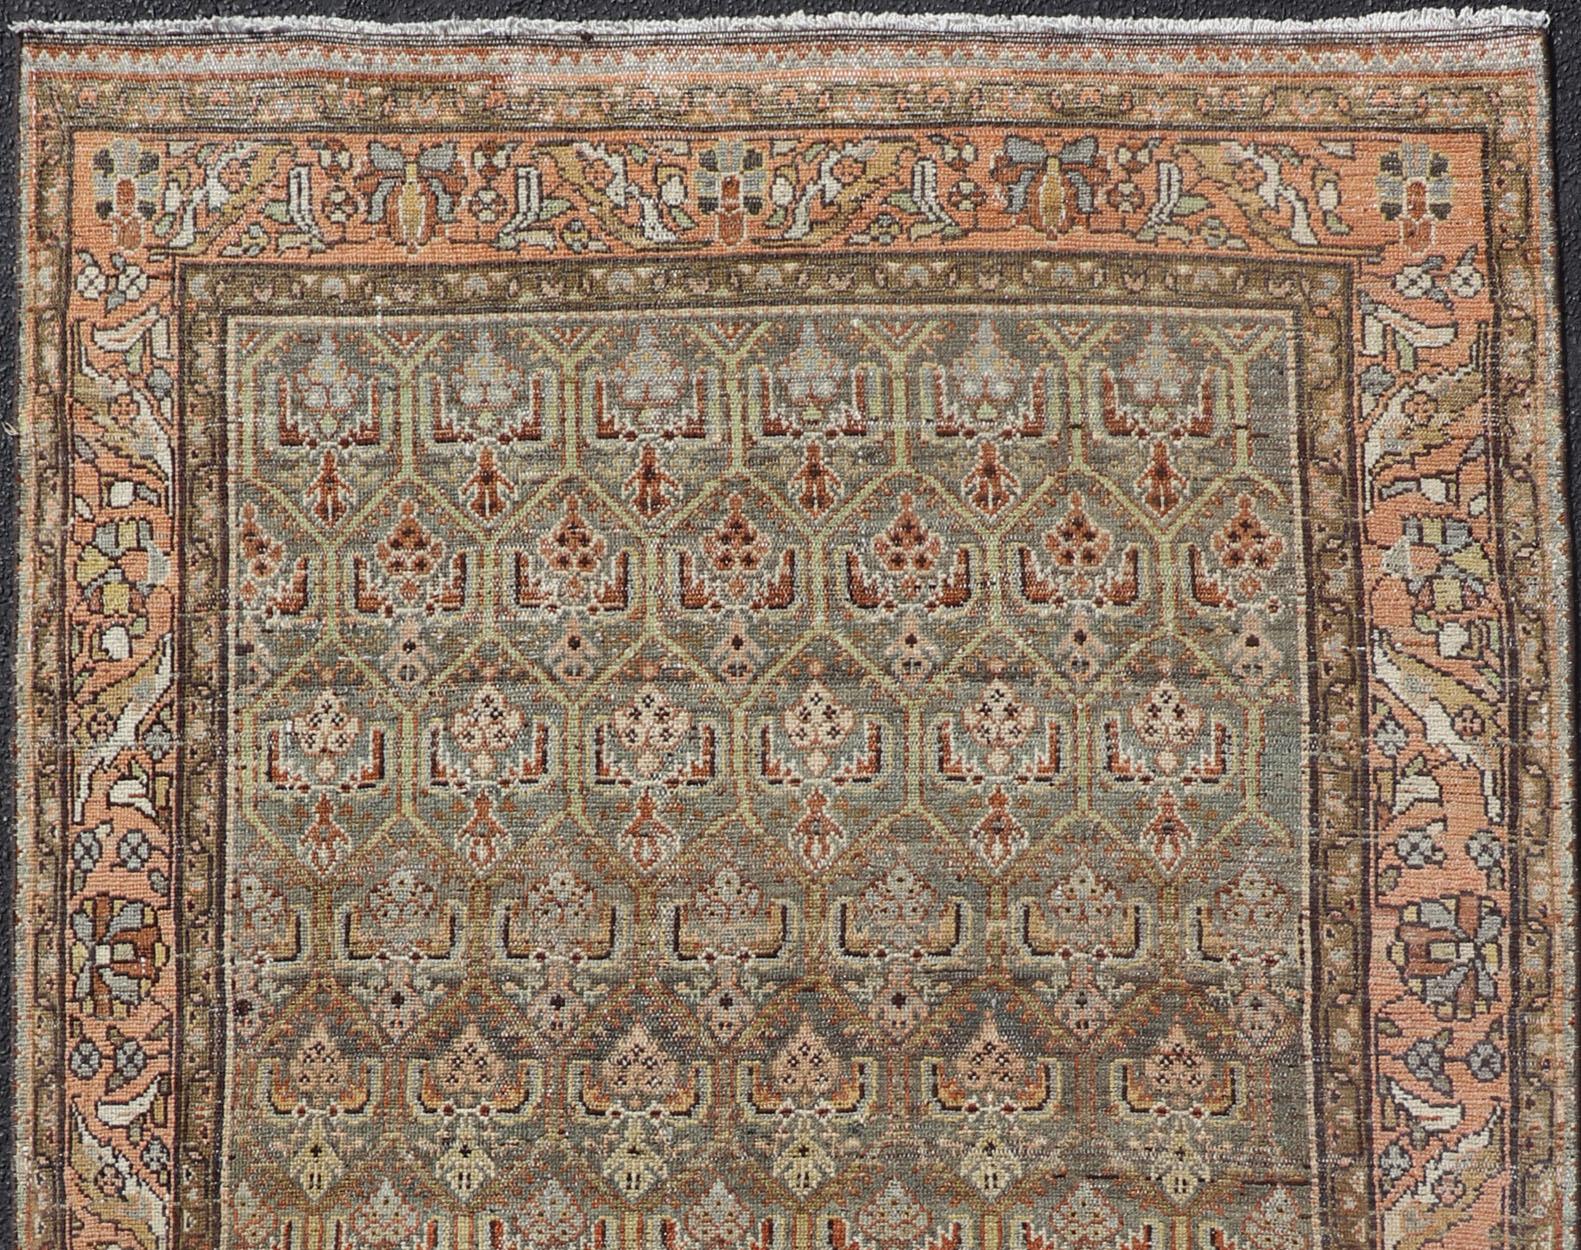 Kurdish Antique Gallery Runner with All-Over Tribal Design in Brown's and Pink For Sale 2